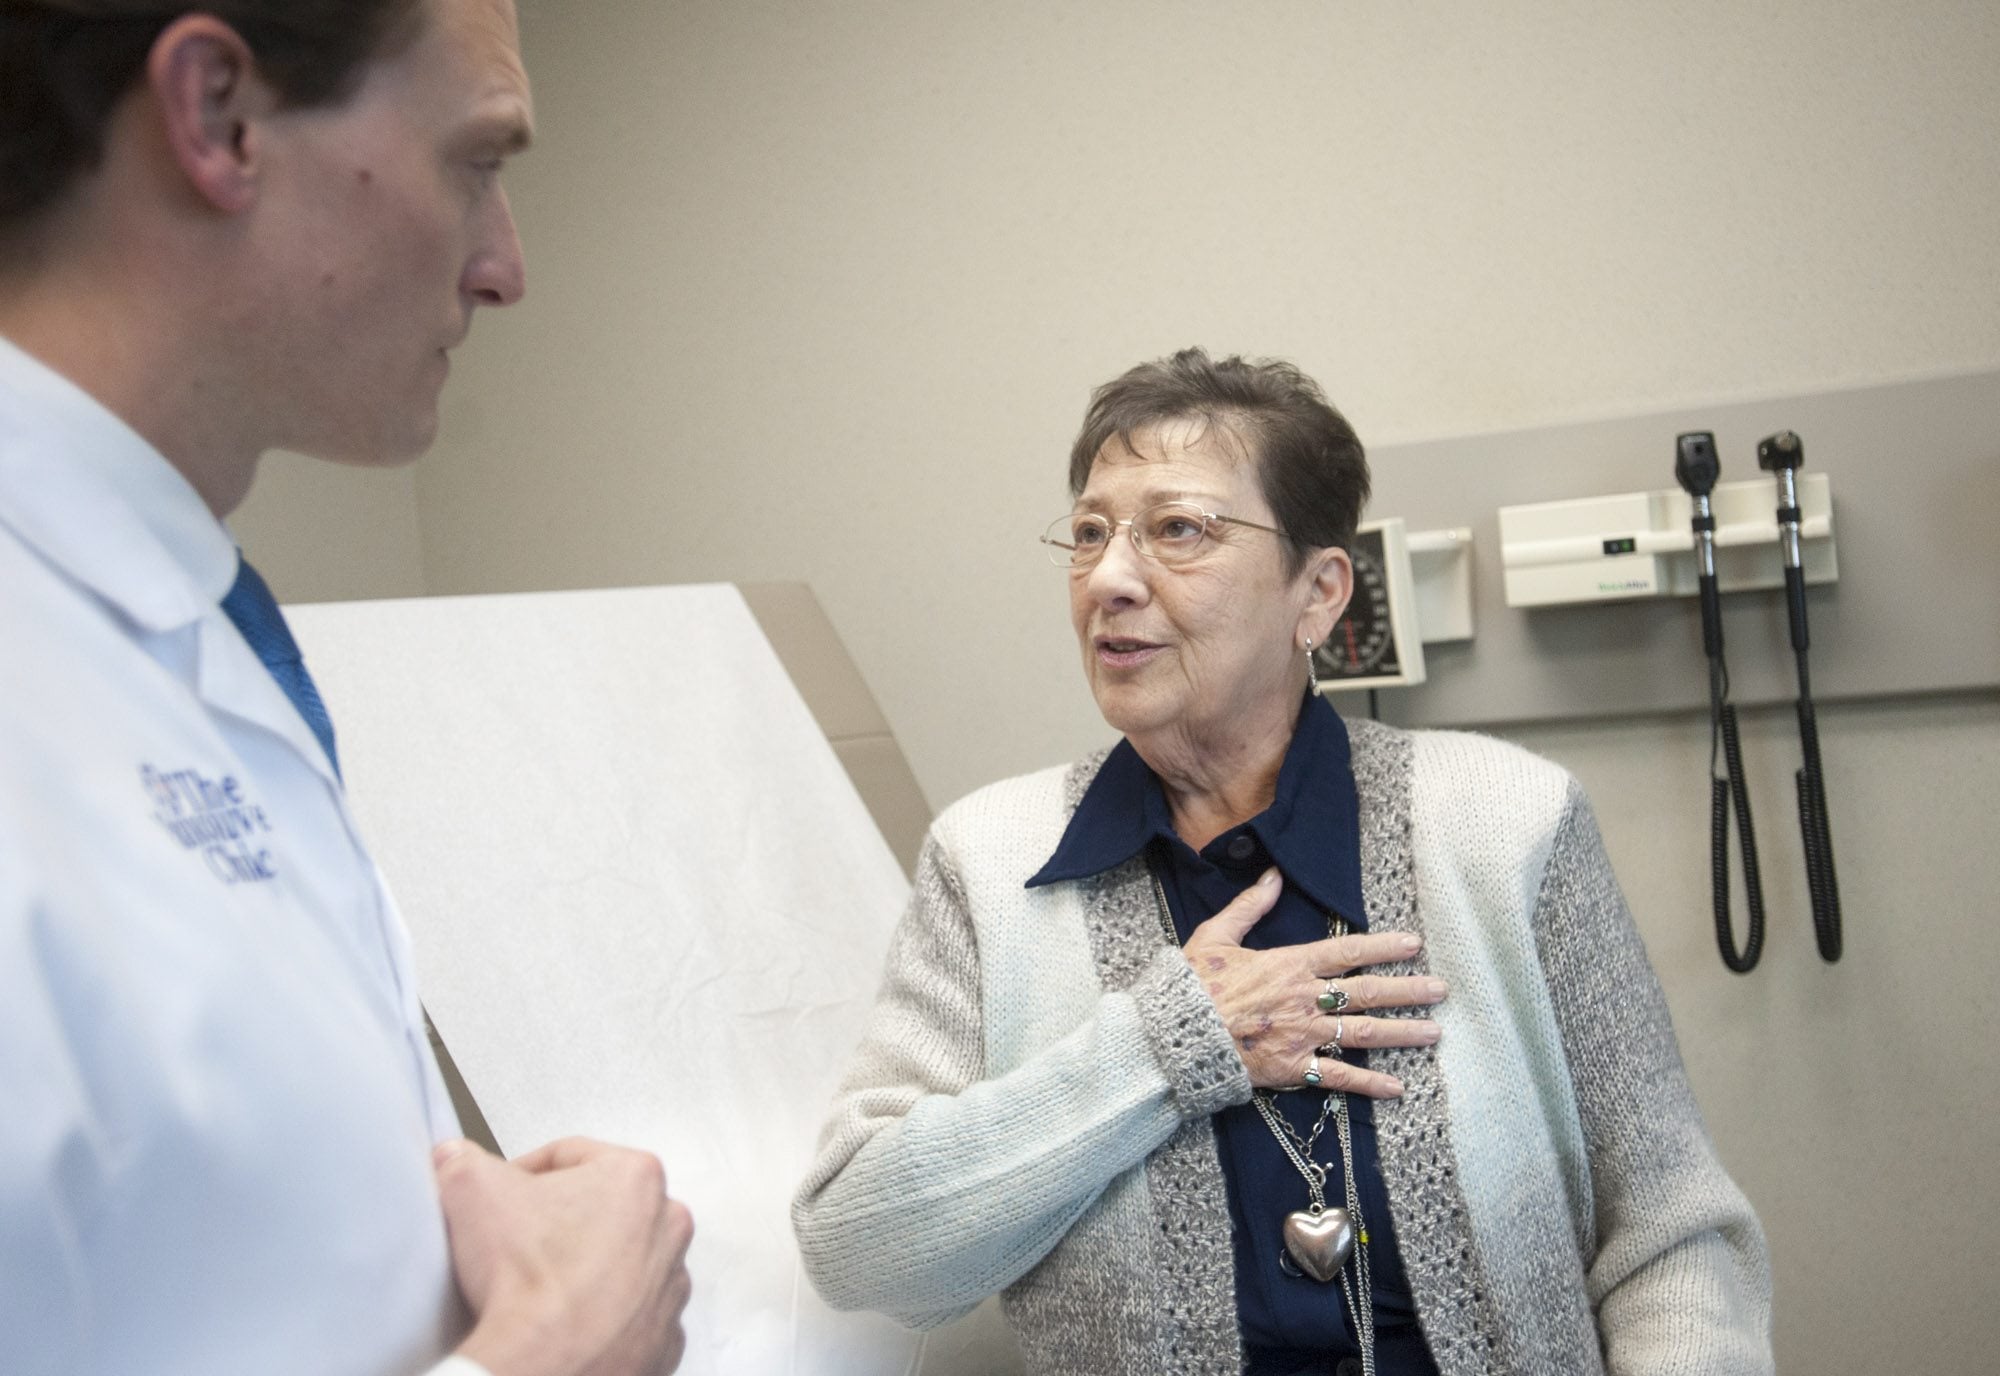 Sharon Parks of Ryderwood talks with Dr. Nathan Boyer, an interventional cardiologist, during a follow-up appointment Tuesday at The Vancouver Clinic. Last month, Boyer performed a new procedure, called transcatheter aortic valve replacement, on Parks to replace a diseased aortic valve.